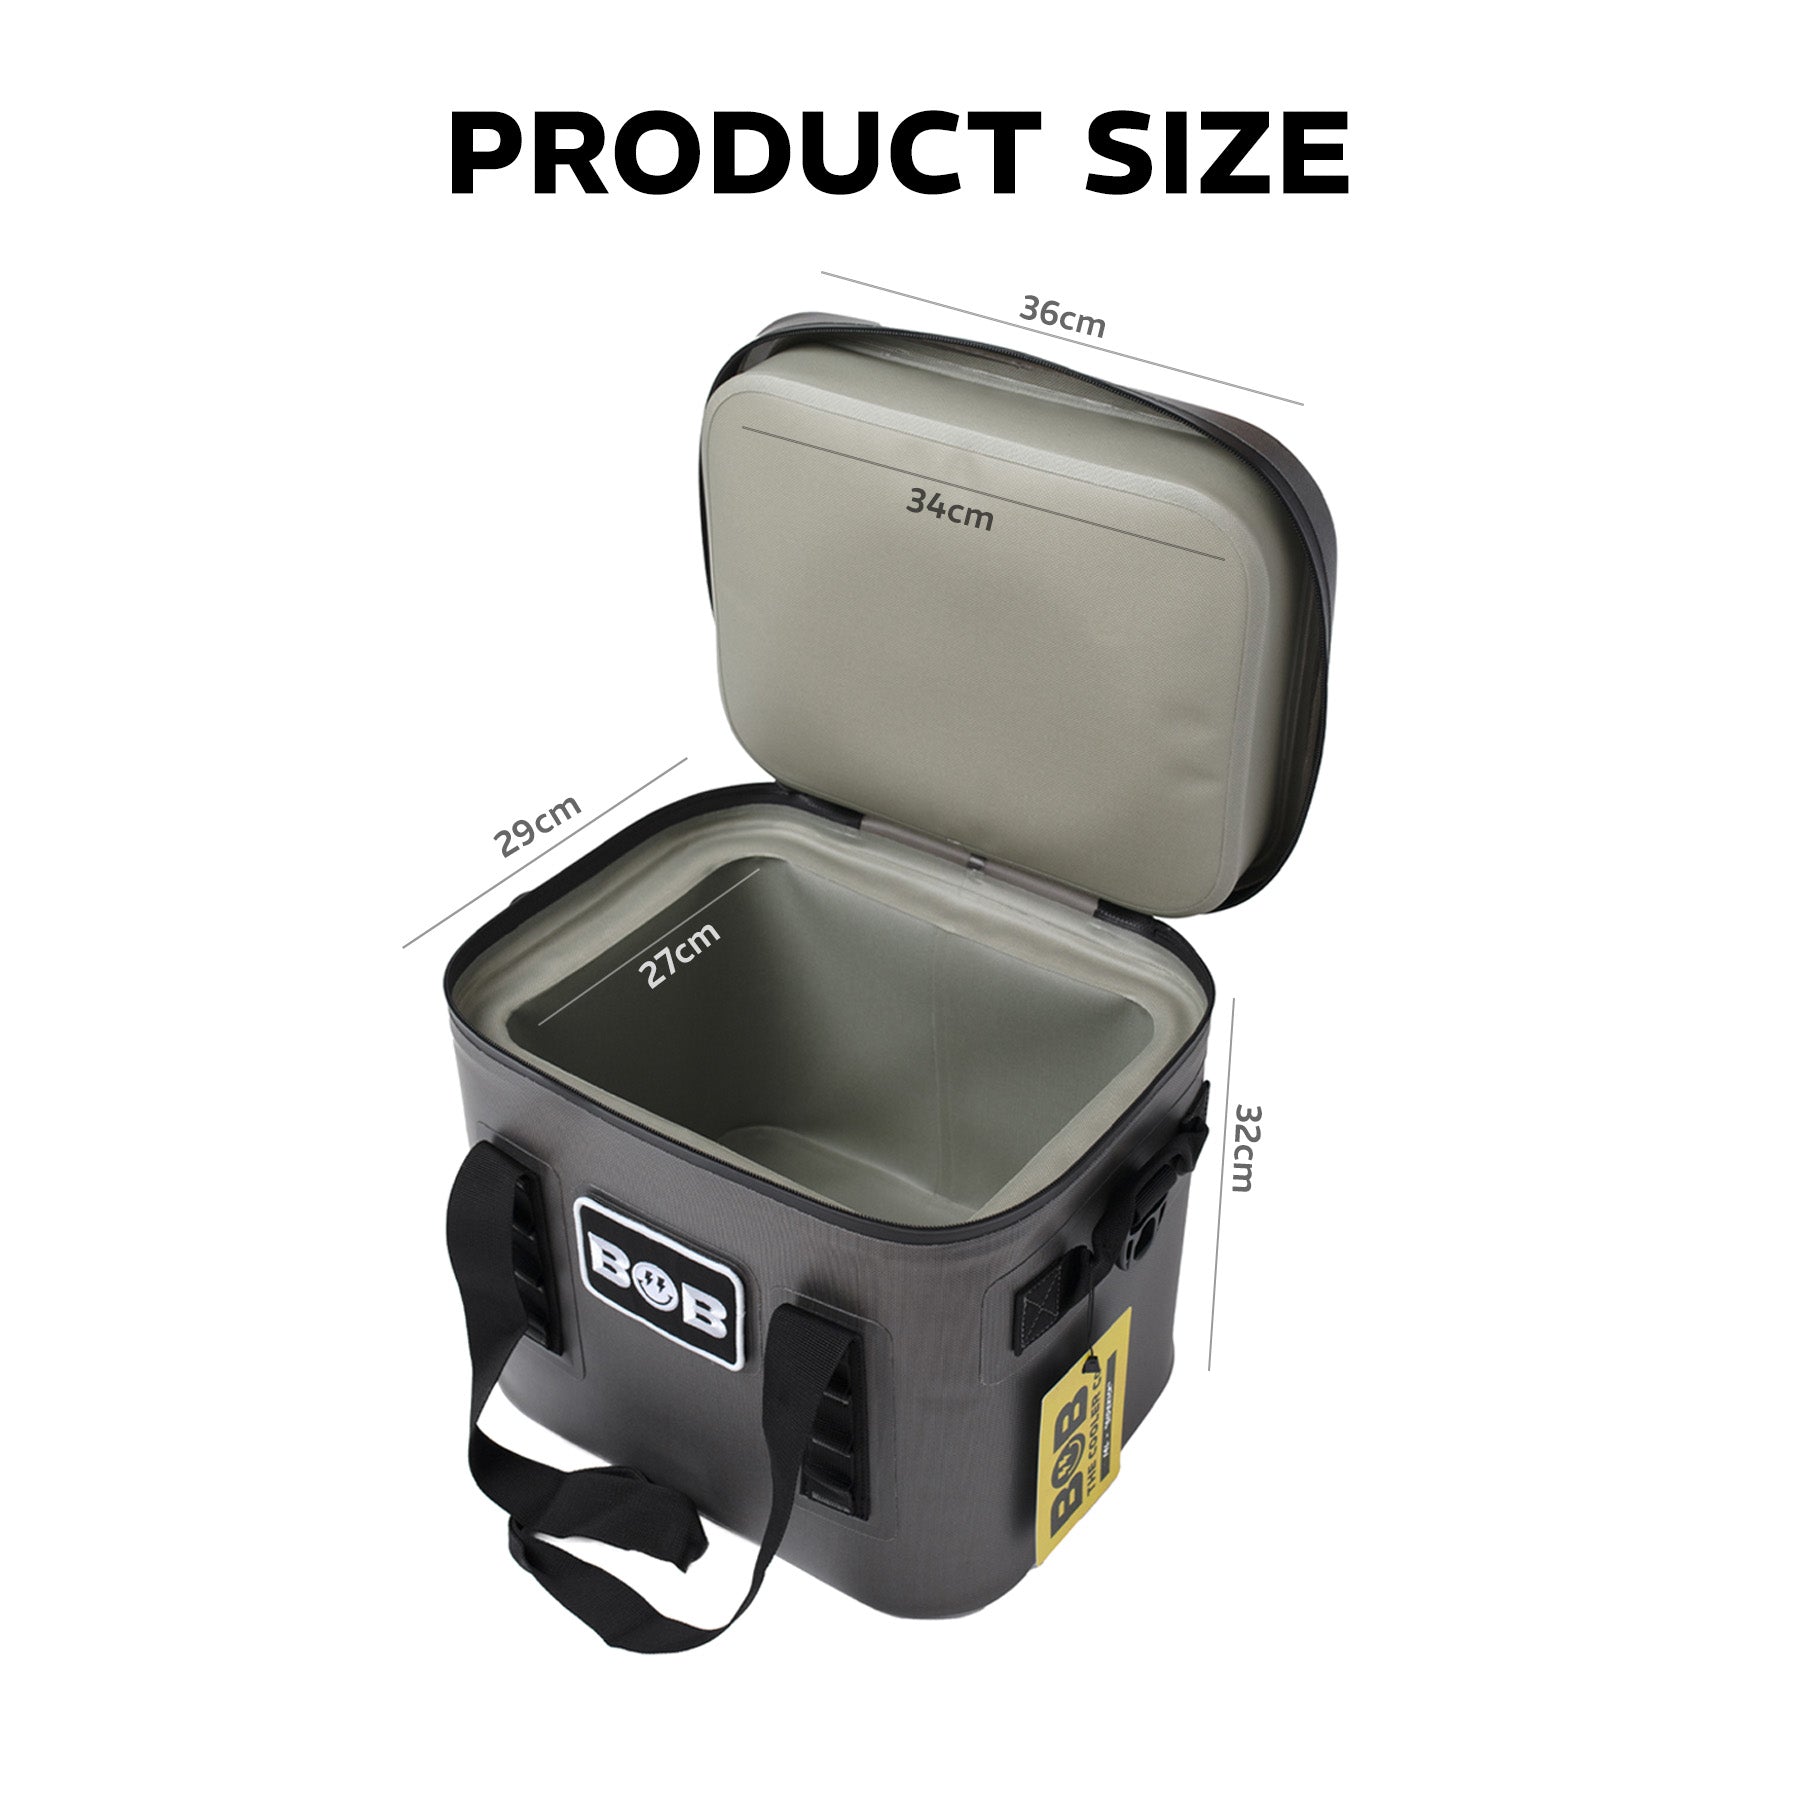 Yodo 25L Collapsible Soft Cooler Bag - Family Size Roomy for